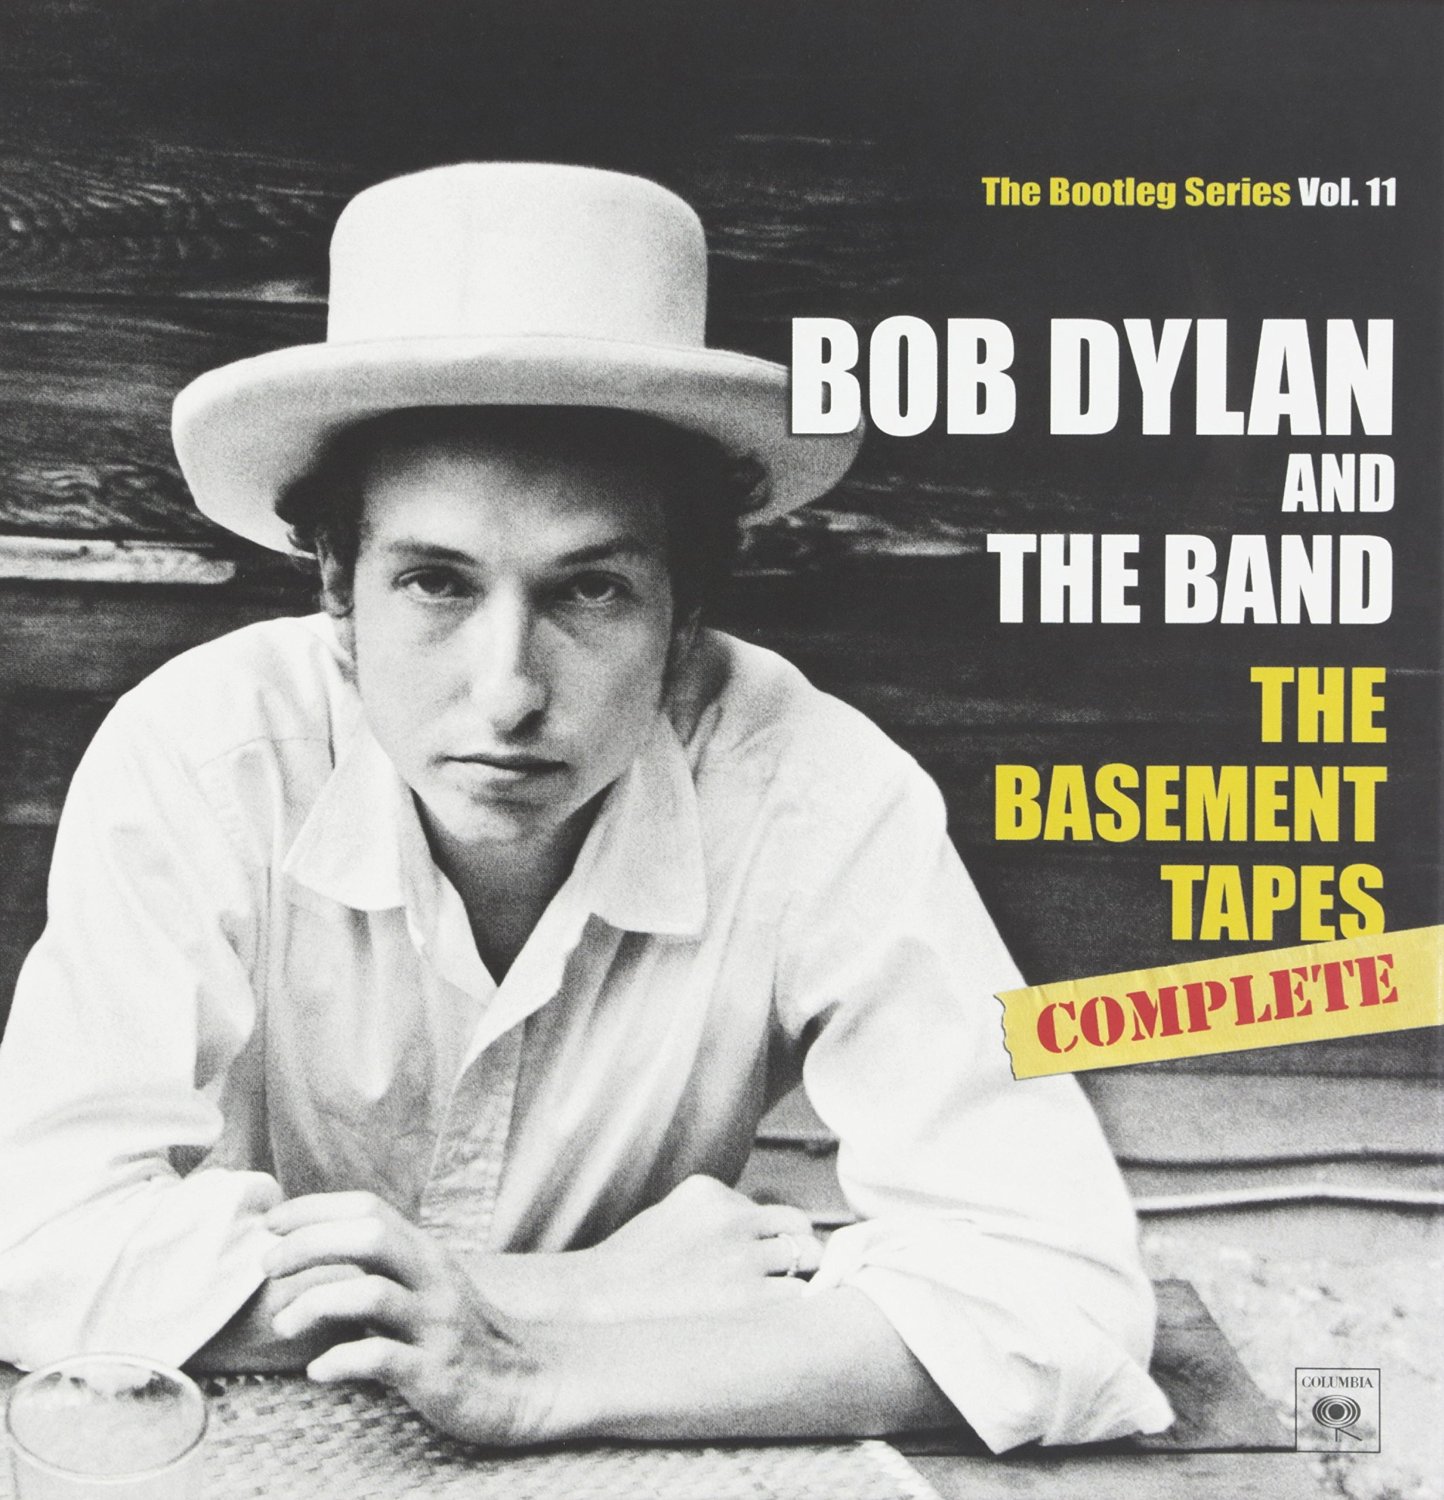 The Basement Tapes Complete: The Bootleg Series Vol. 11(Deluxe Edition)